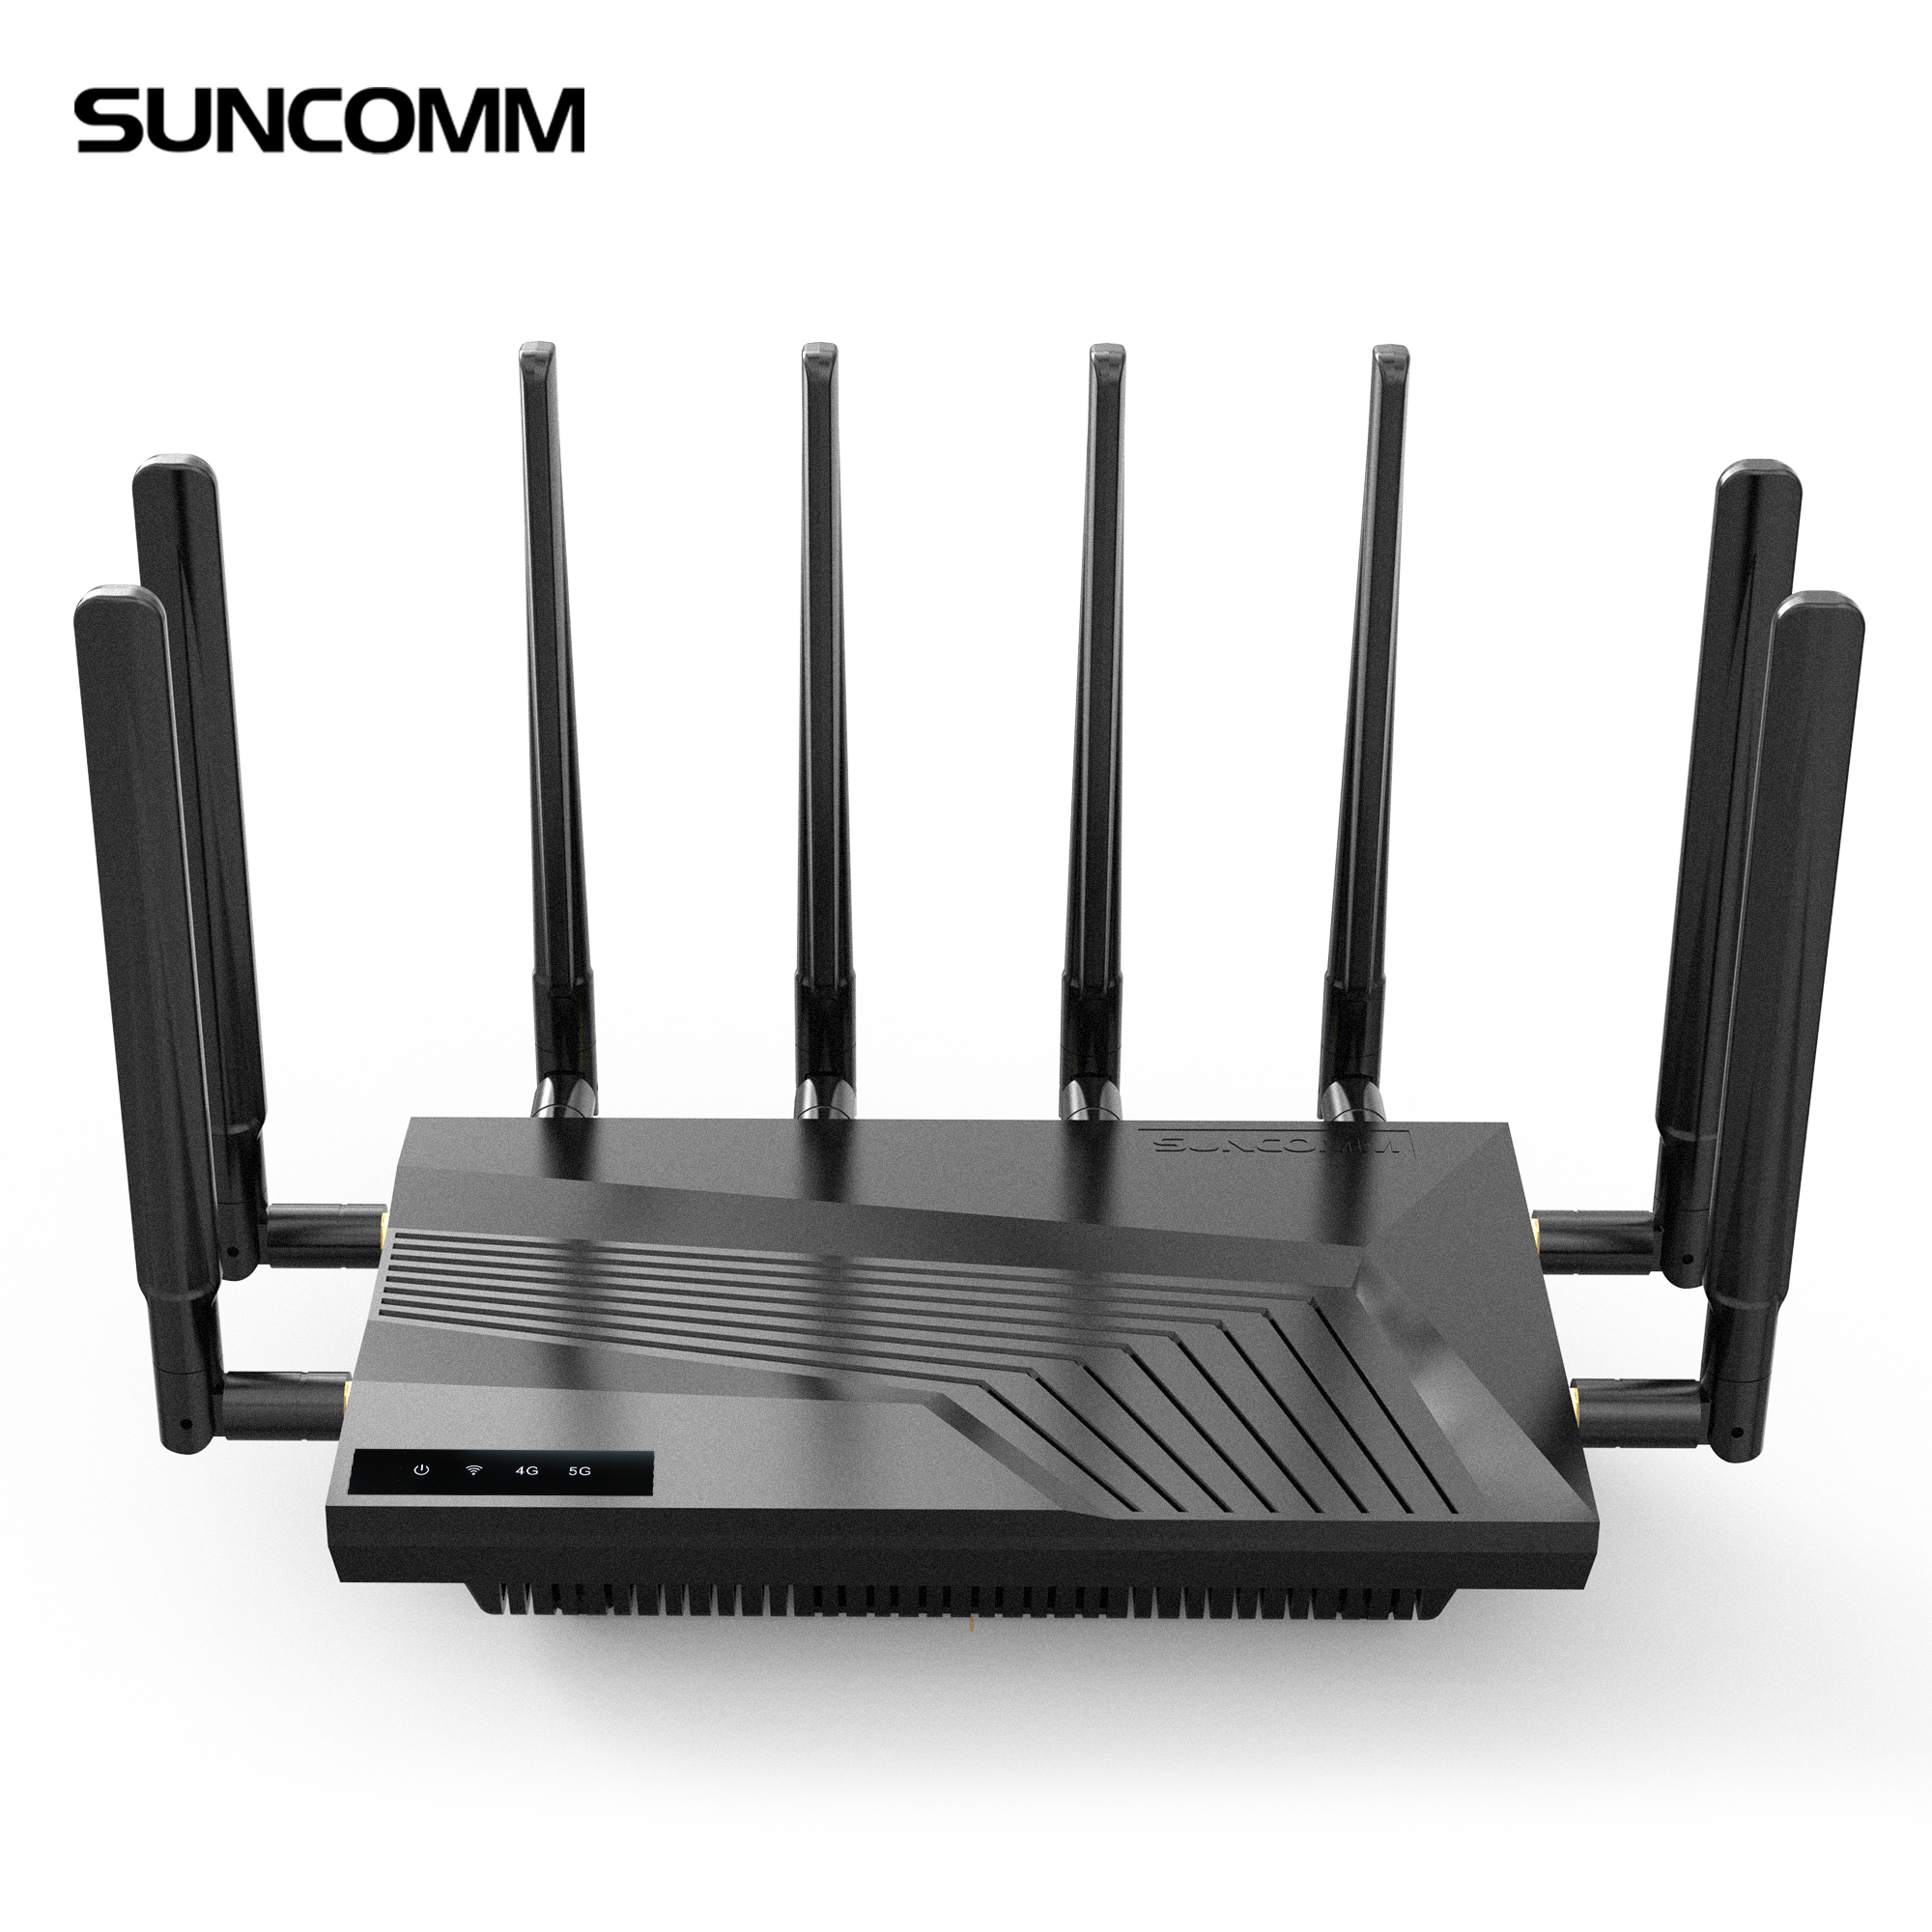 SUNCOMM SE06 WiFi 6 Dual Band 5G Home Router with sim card slot